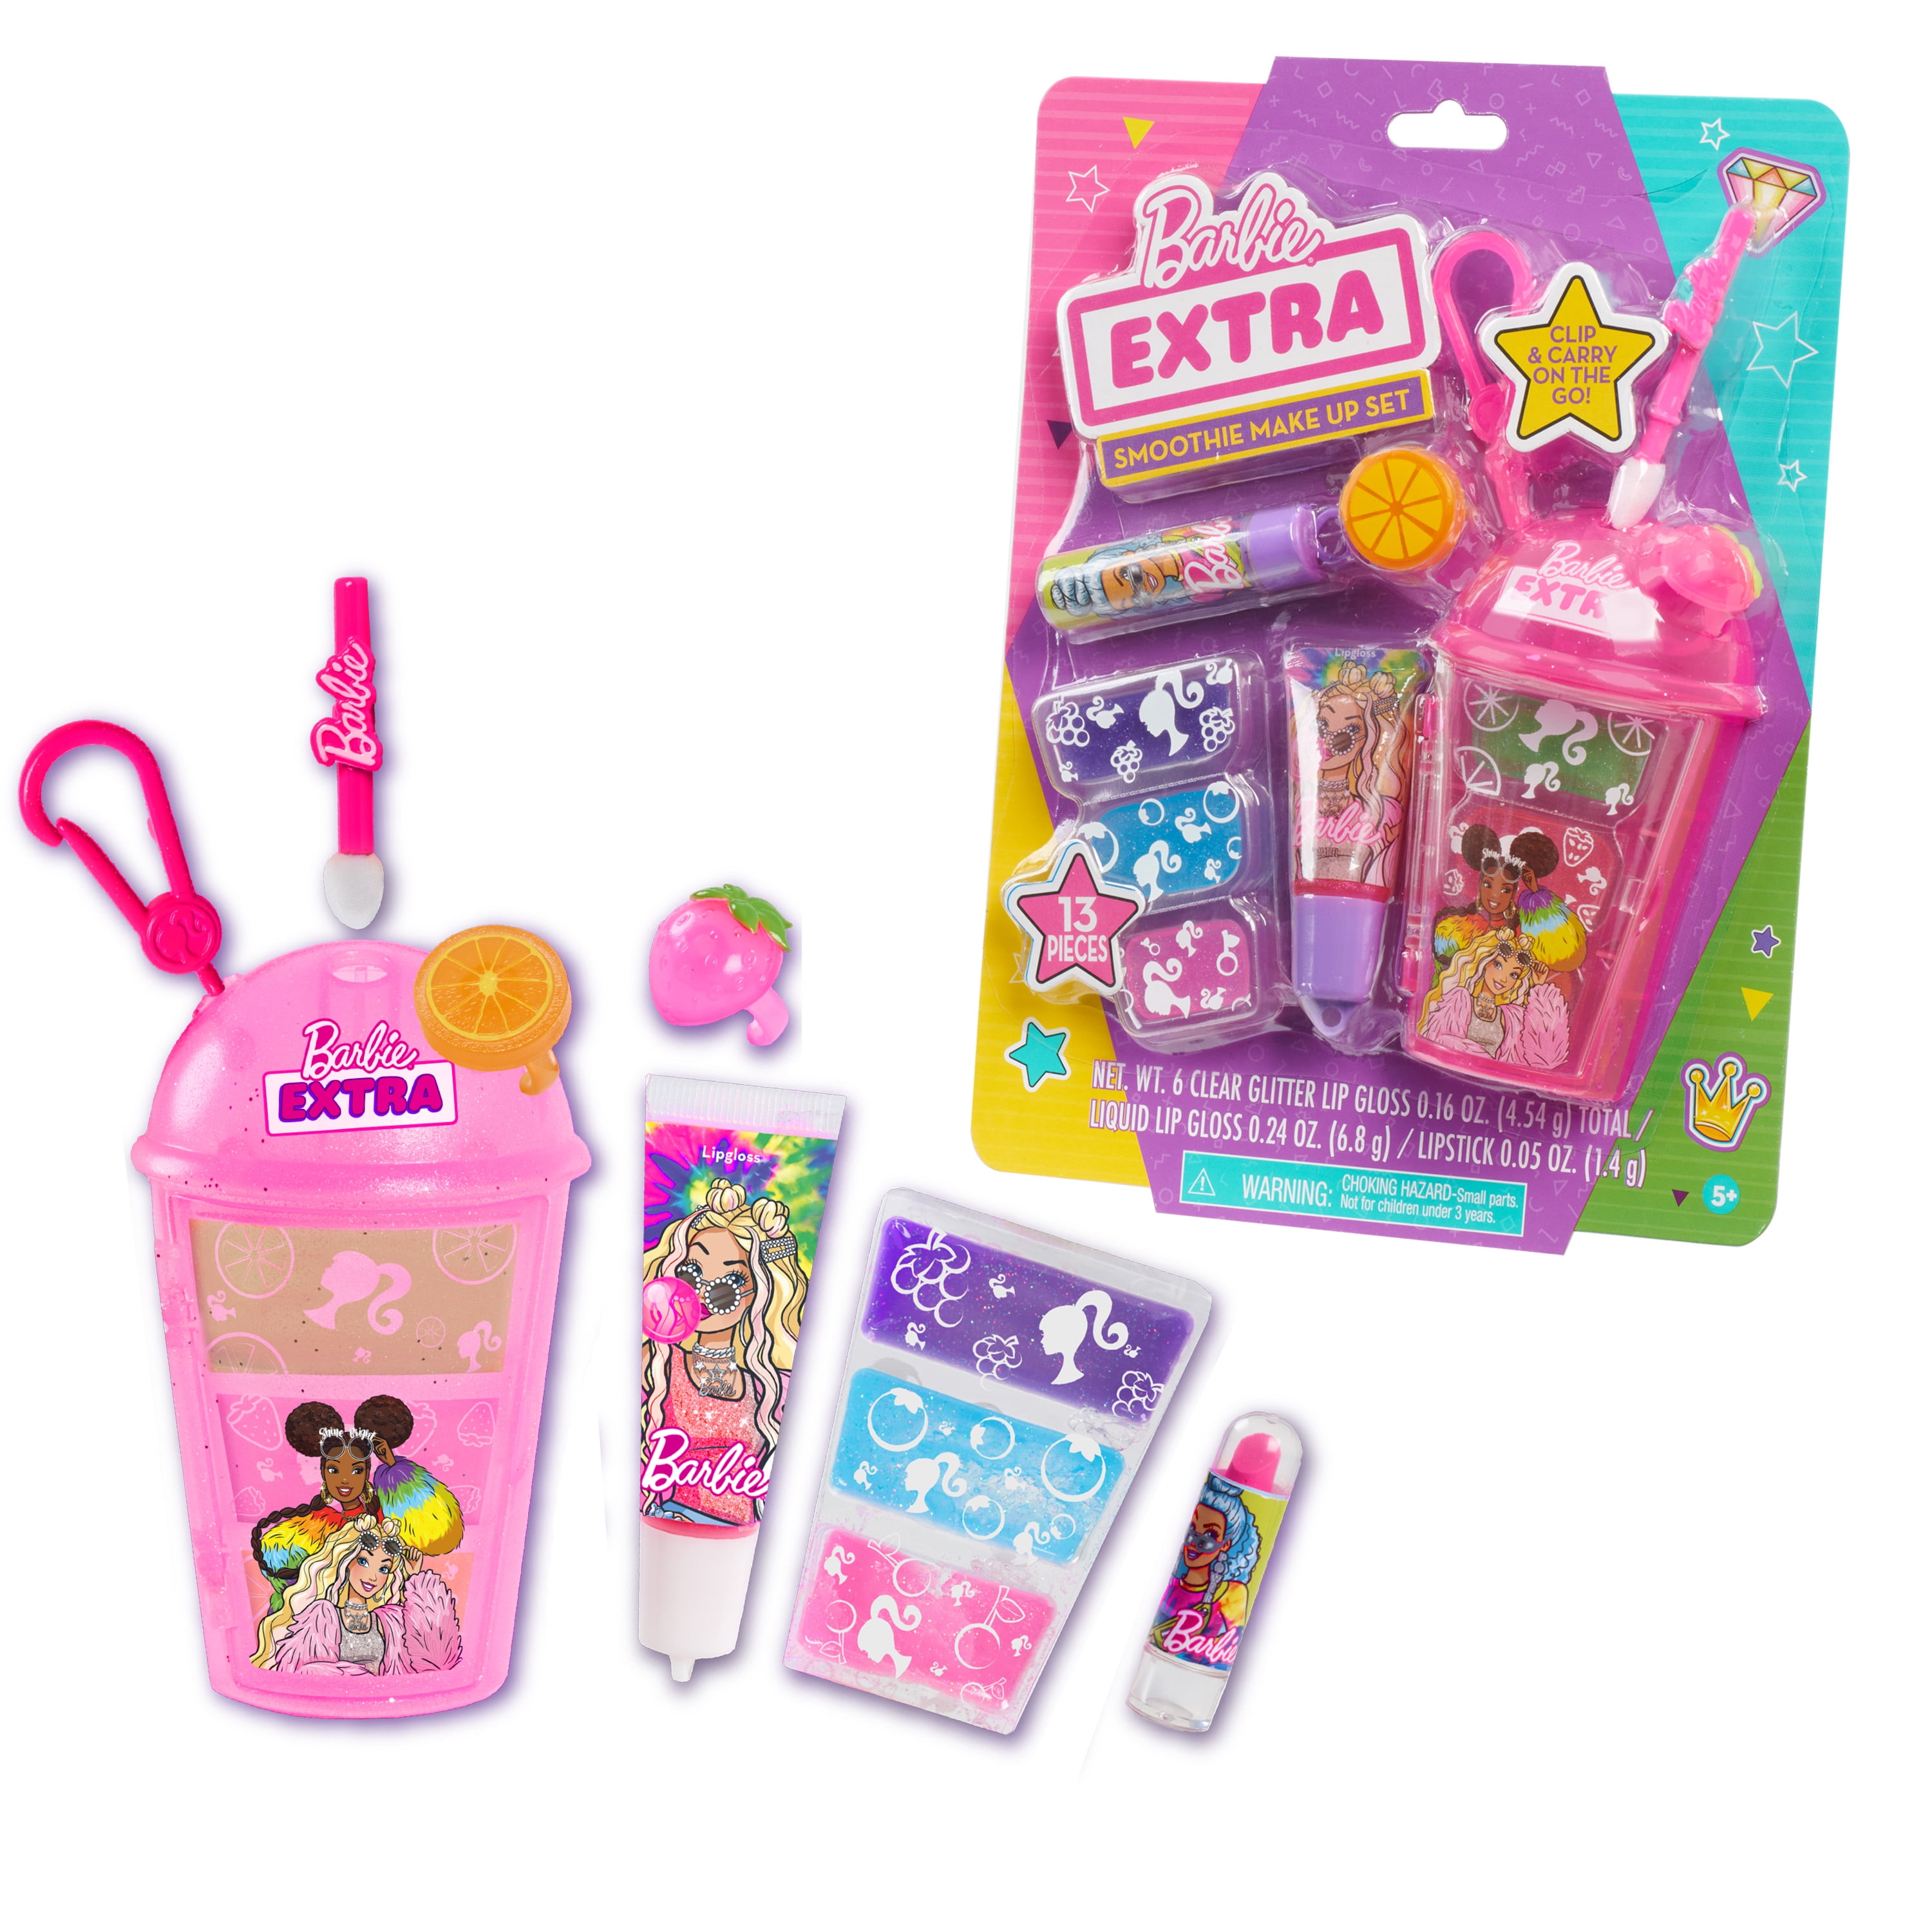 Wegversperring Standaard James Dyson Barbie Extra Smoothie Makeup Set, 13-piece Kids Pretend Play Makeup Set,  Kids Toys for Ages 5 Up, Gifts and Presents - Walmart.com